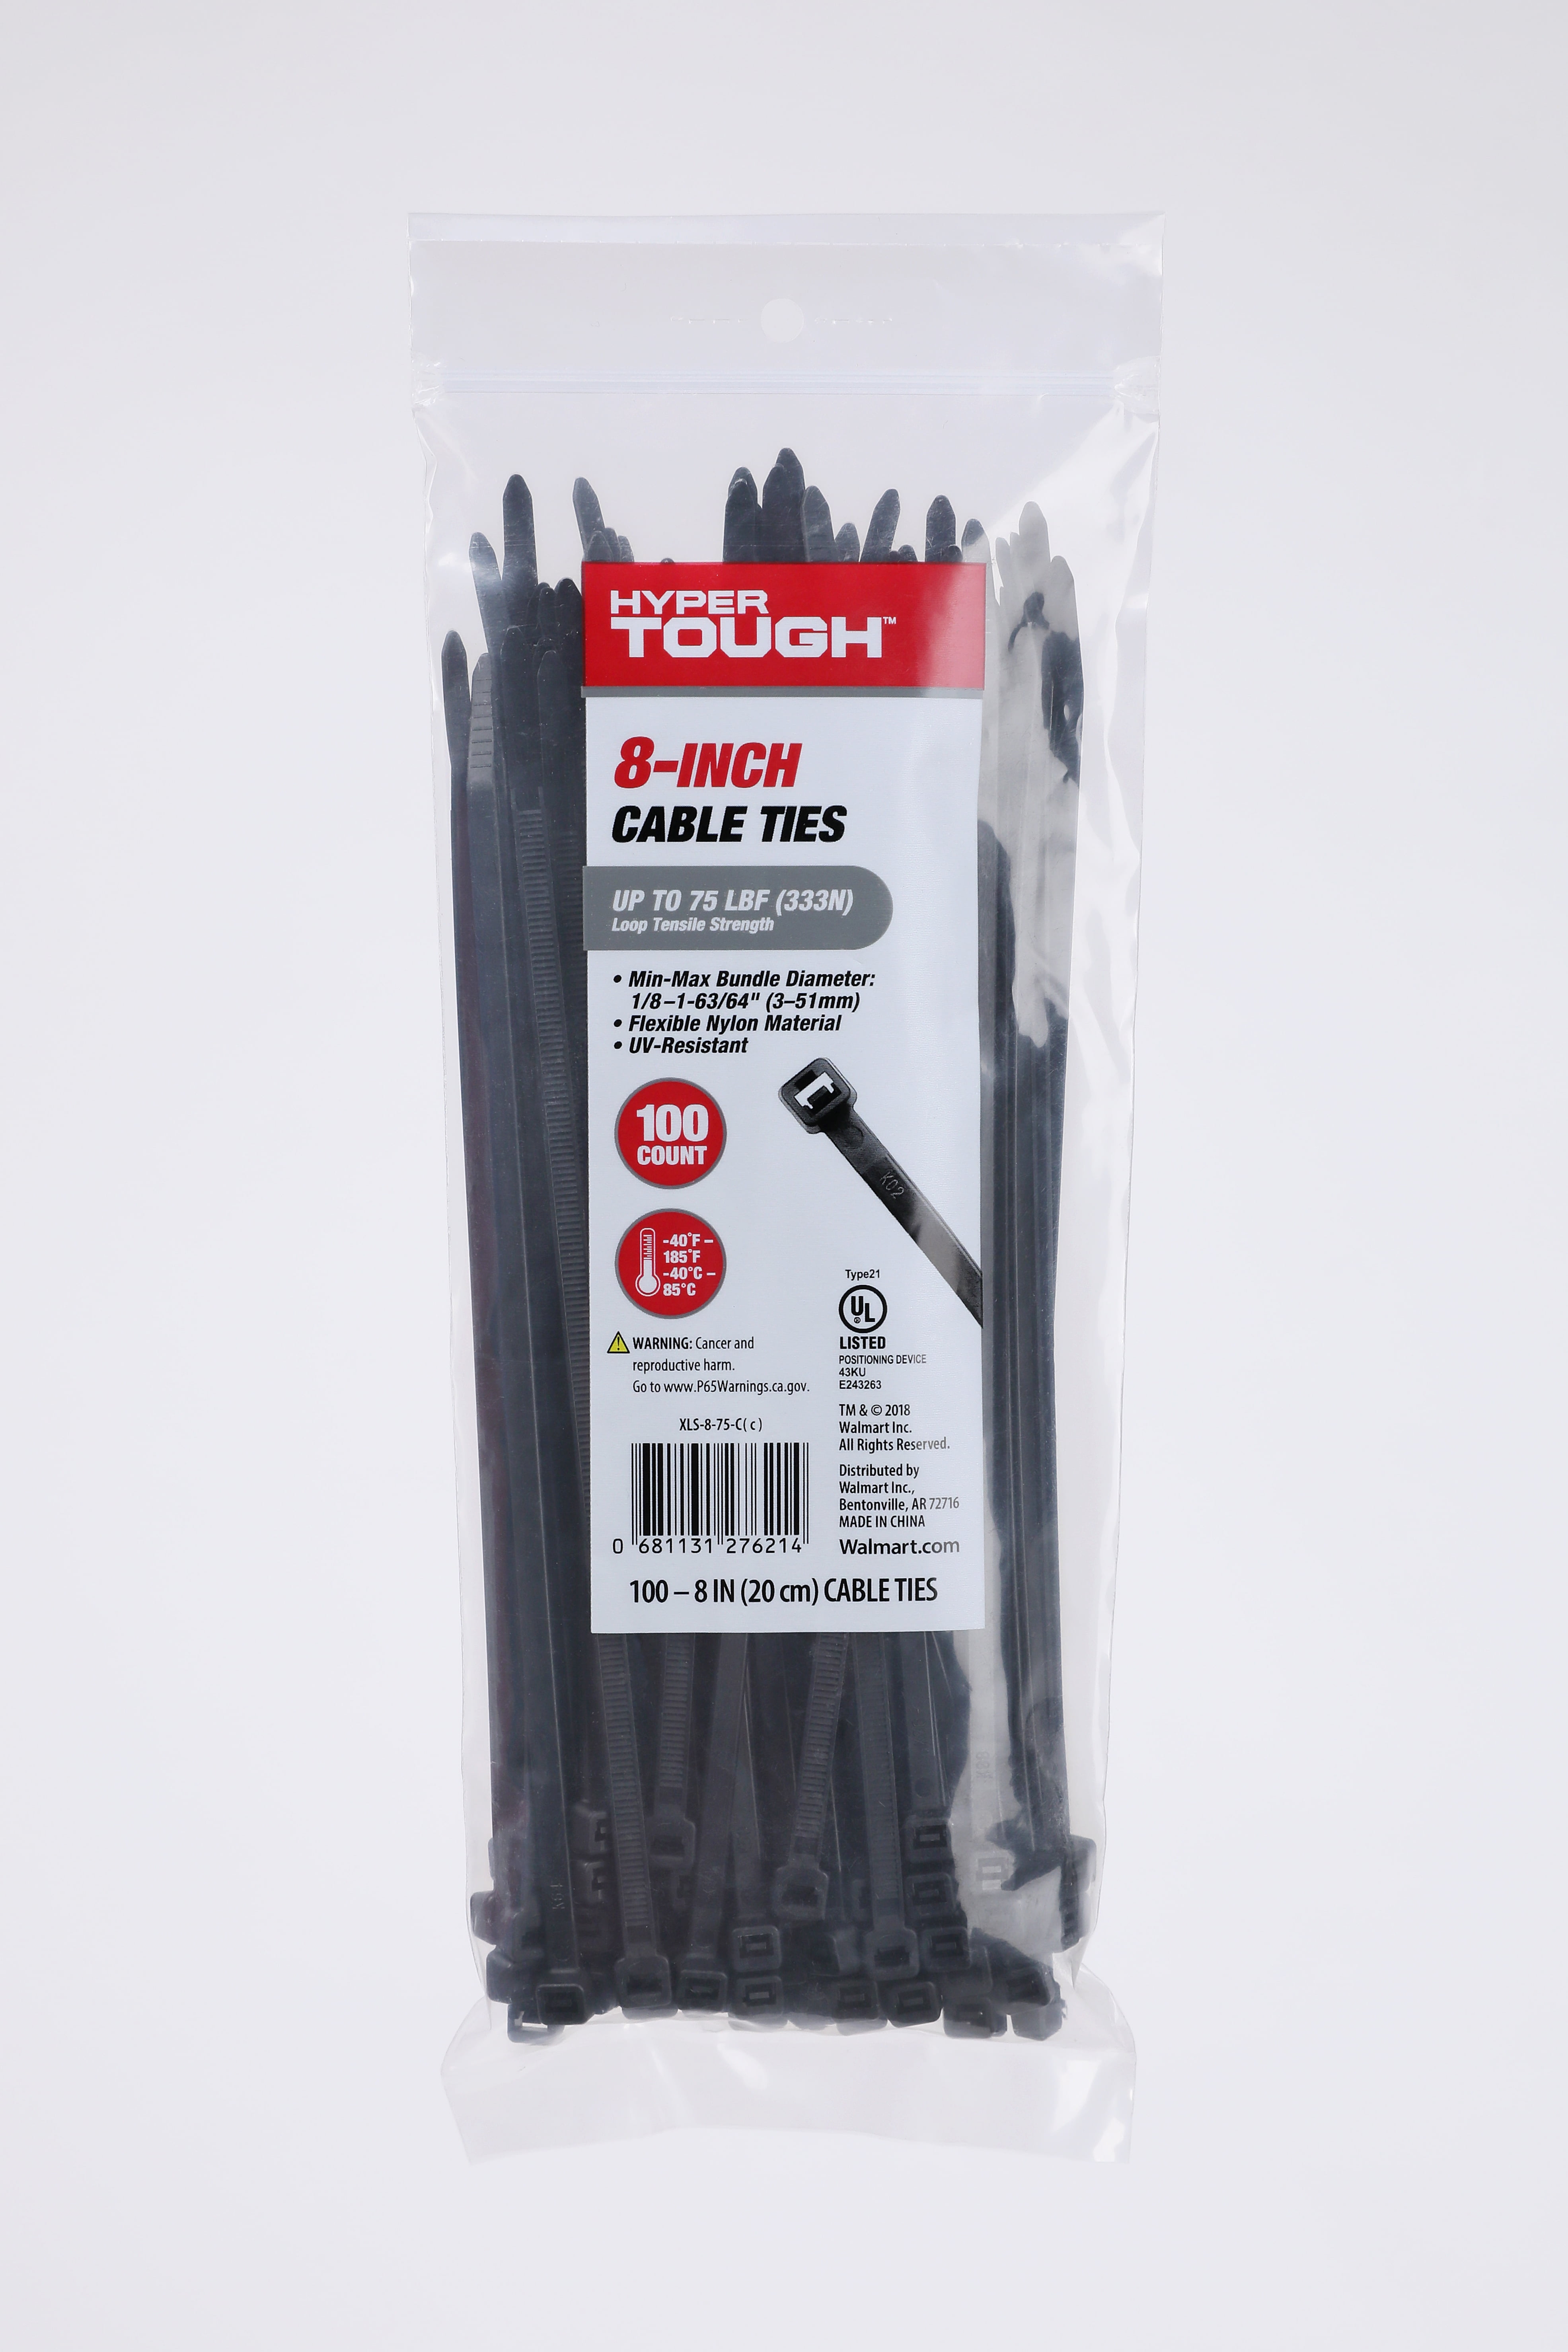 HEAVY DUTY 8-inch BLACK Cable Wire Ties Nylon Wrap Zip Tie Resistant 100 PACK 